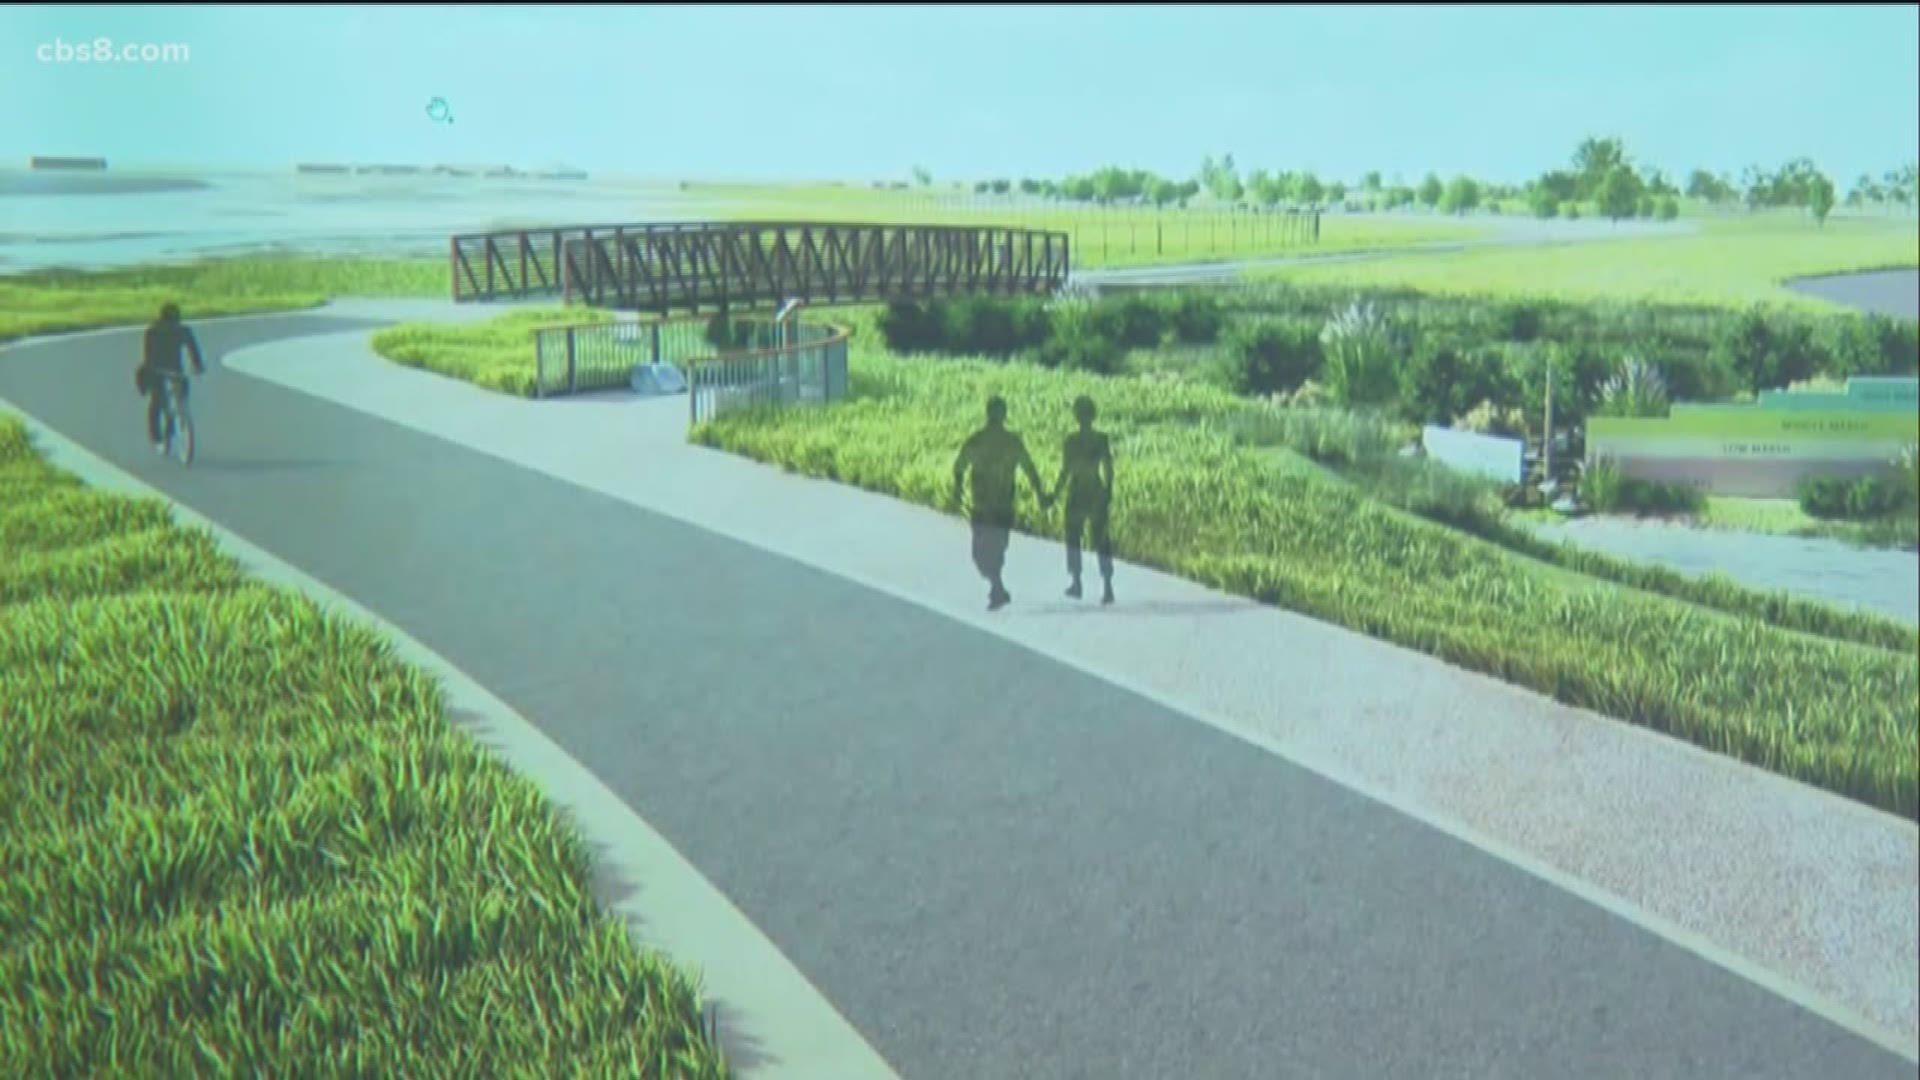 On Monday night Chula Vista and the Port of San Diego laid out their plans to add two parks alongside the Bayfront.